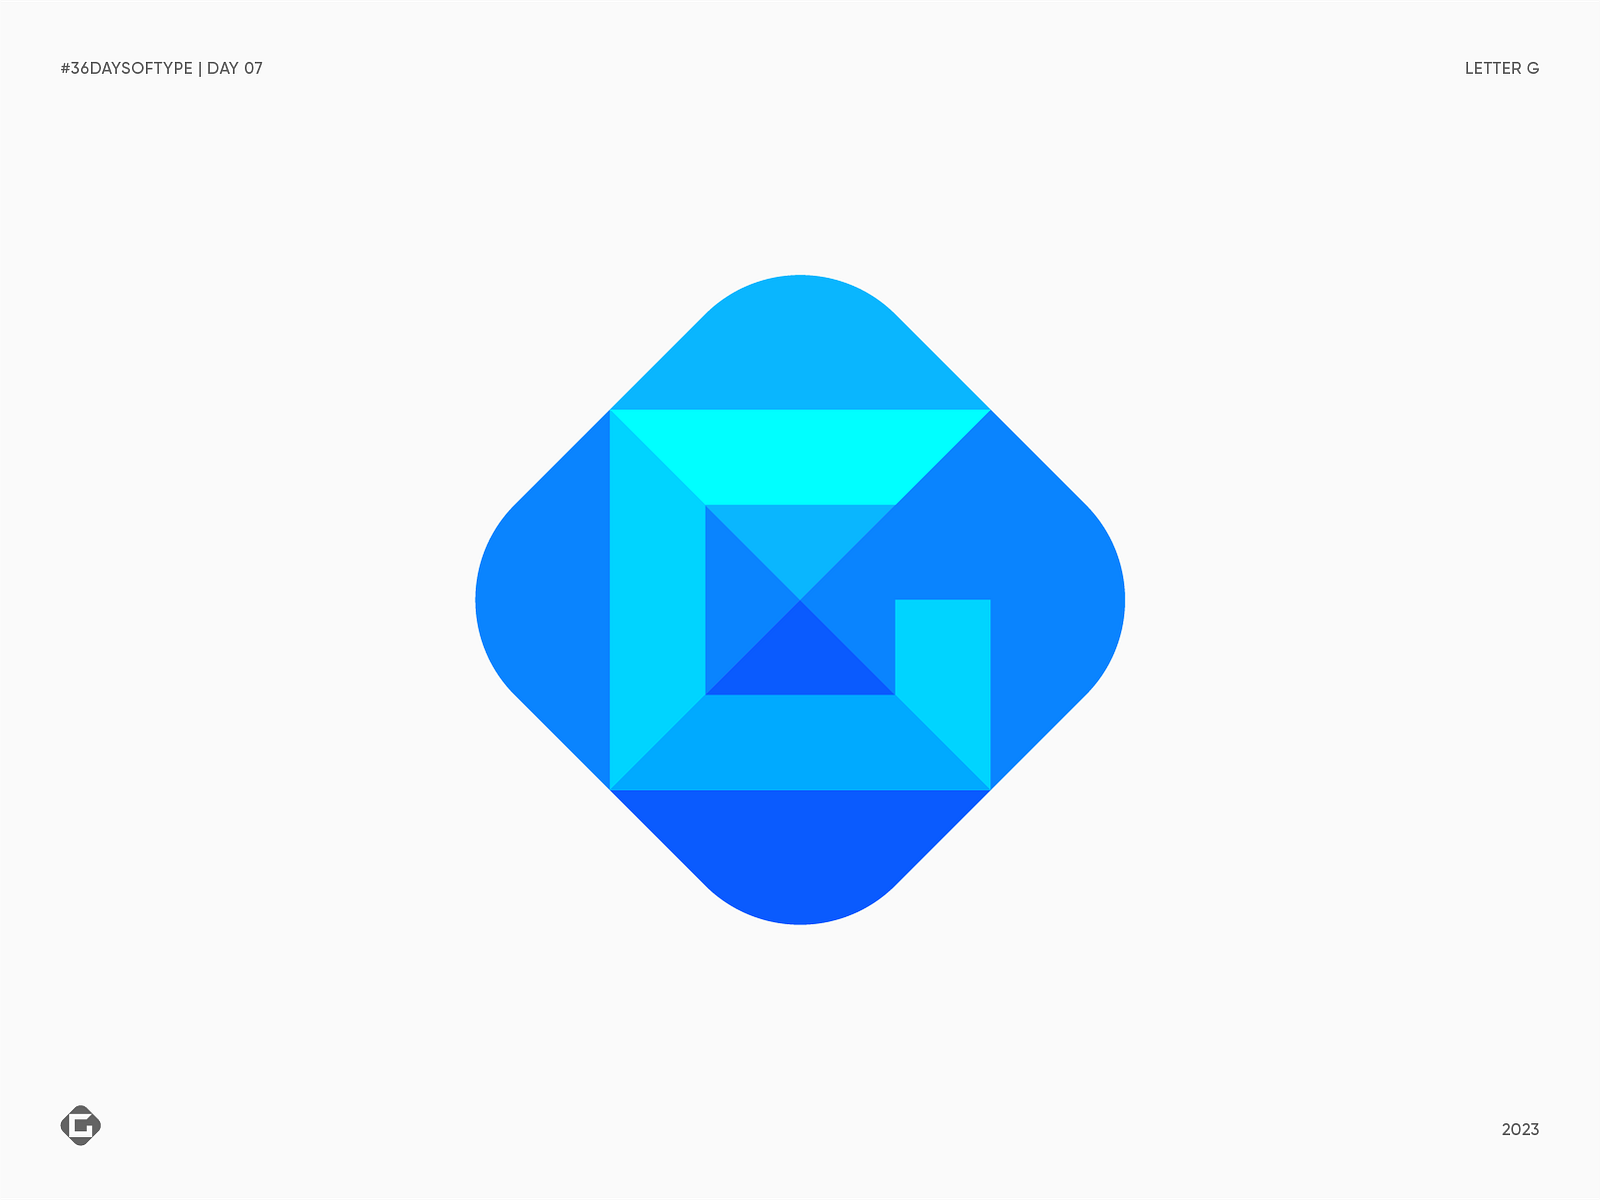 Letter G. 36 Days of Type. Day 07 by Dmitry Lepisov on Dribbble